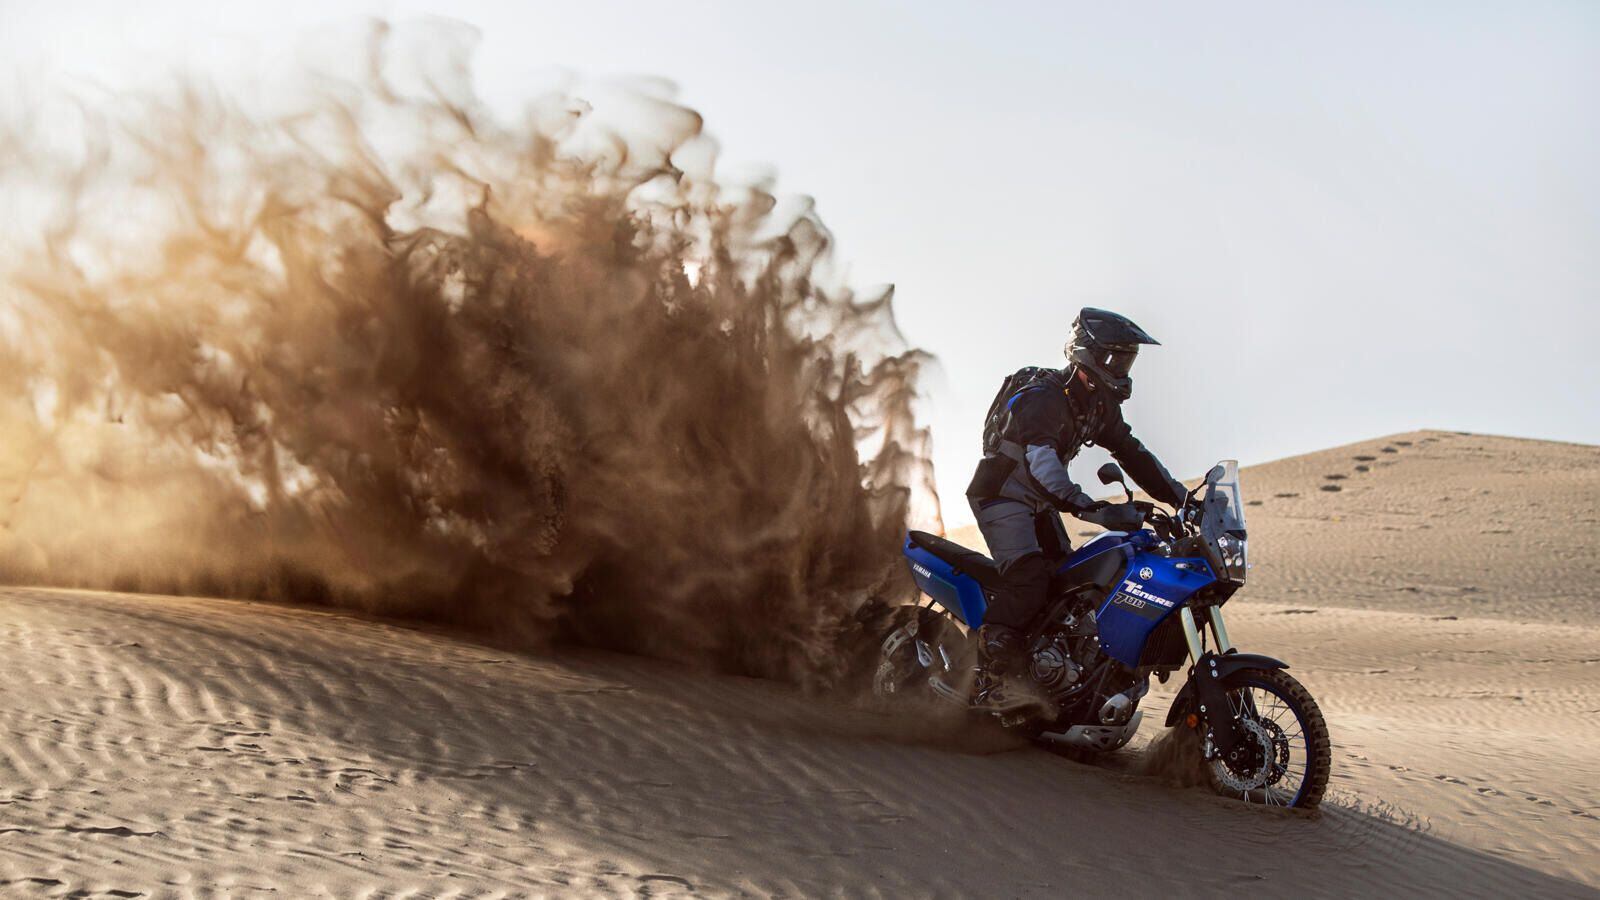 The 2023 Yamaha Ténéré 700 gets some notable upgrades that will give riders more control.